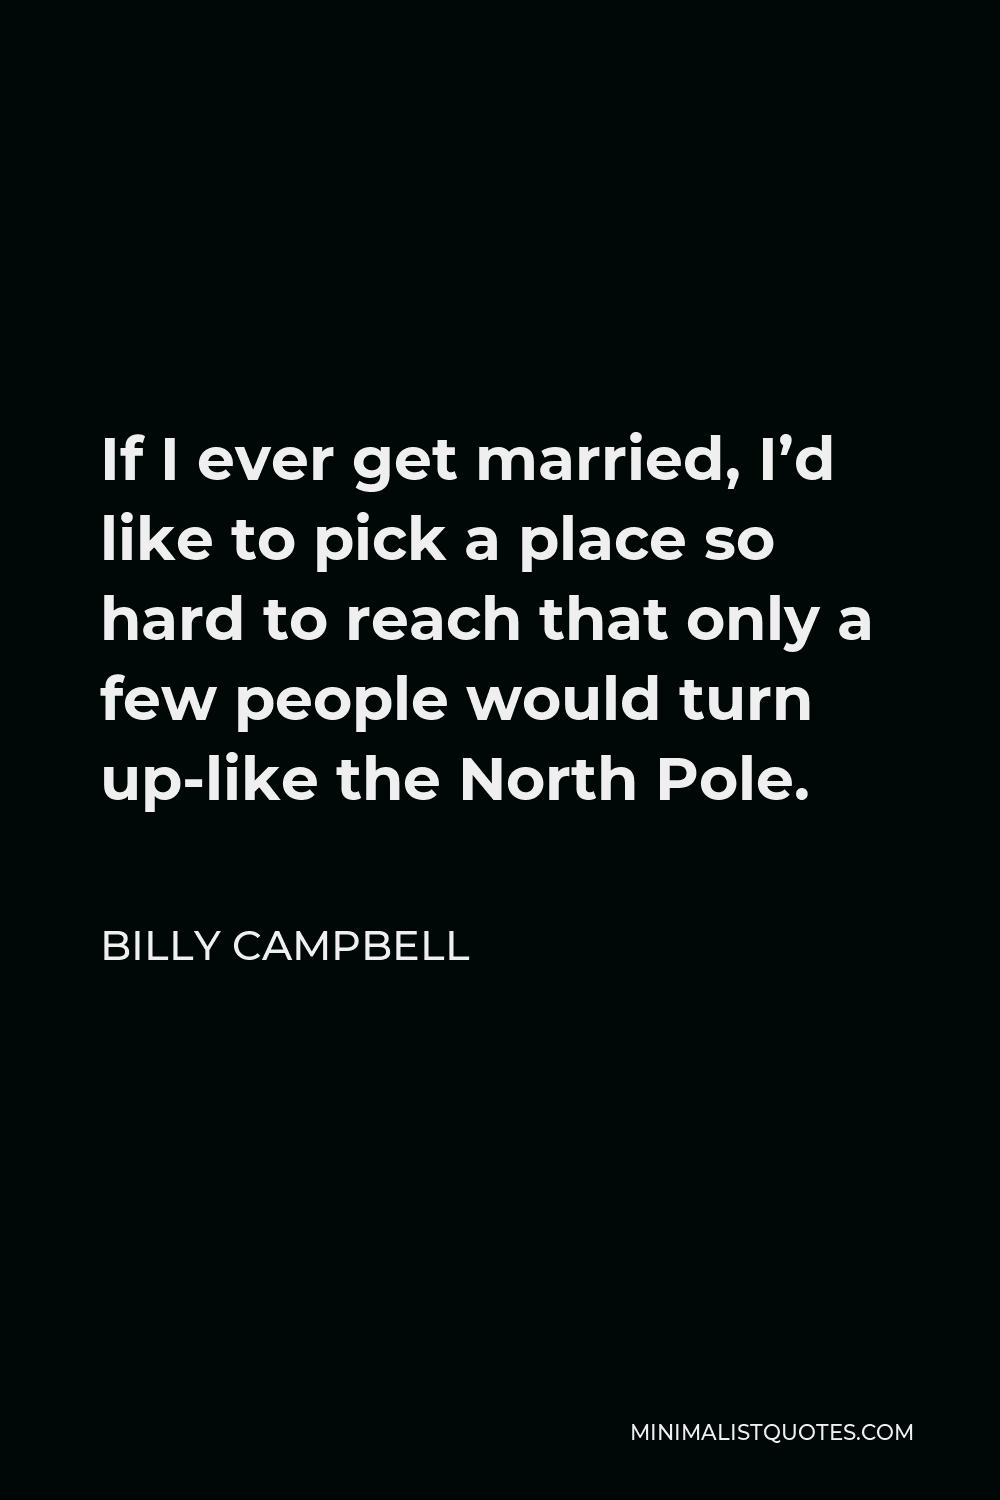 Billy Campbell Quote - If I ever get married, I’d like to pick a place so hard to reach that only a few people would turn up-like the North Pole.